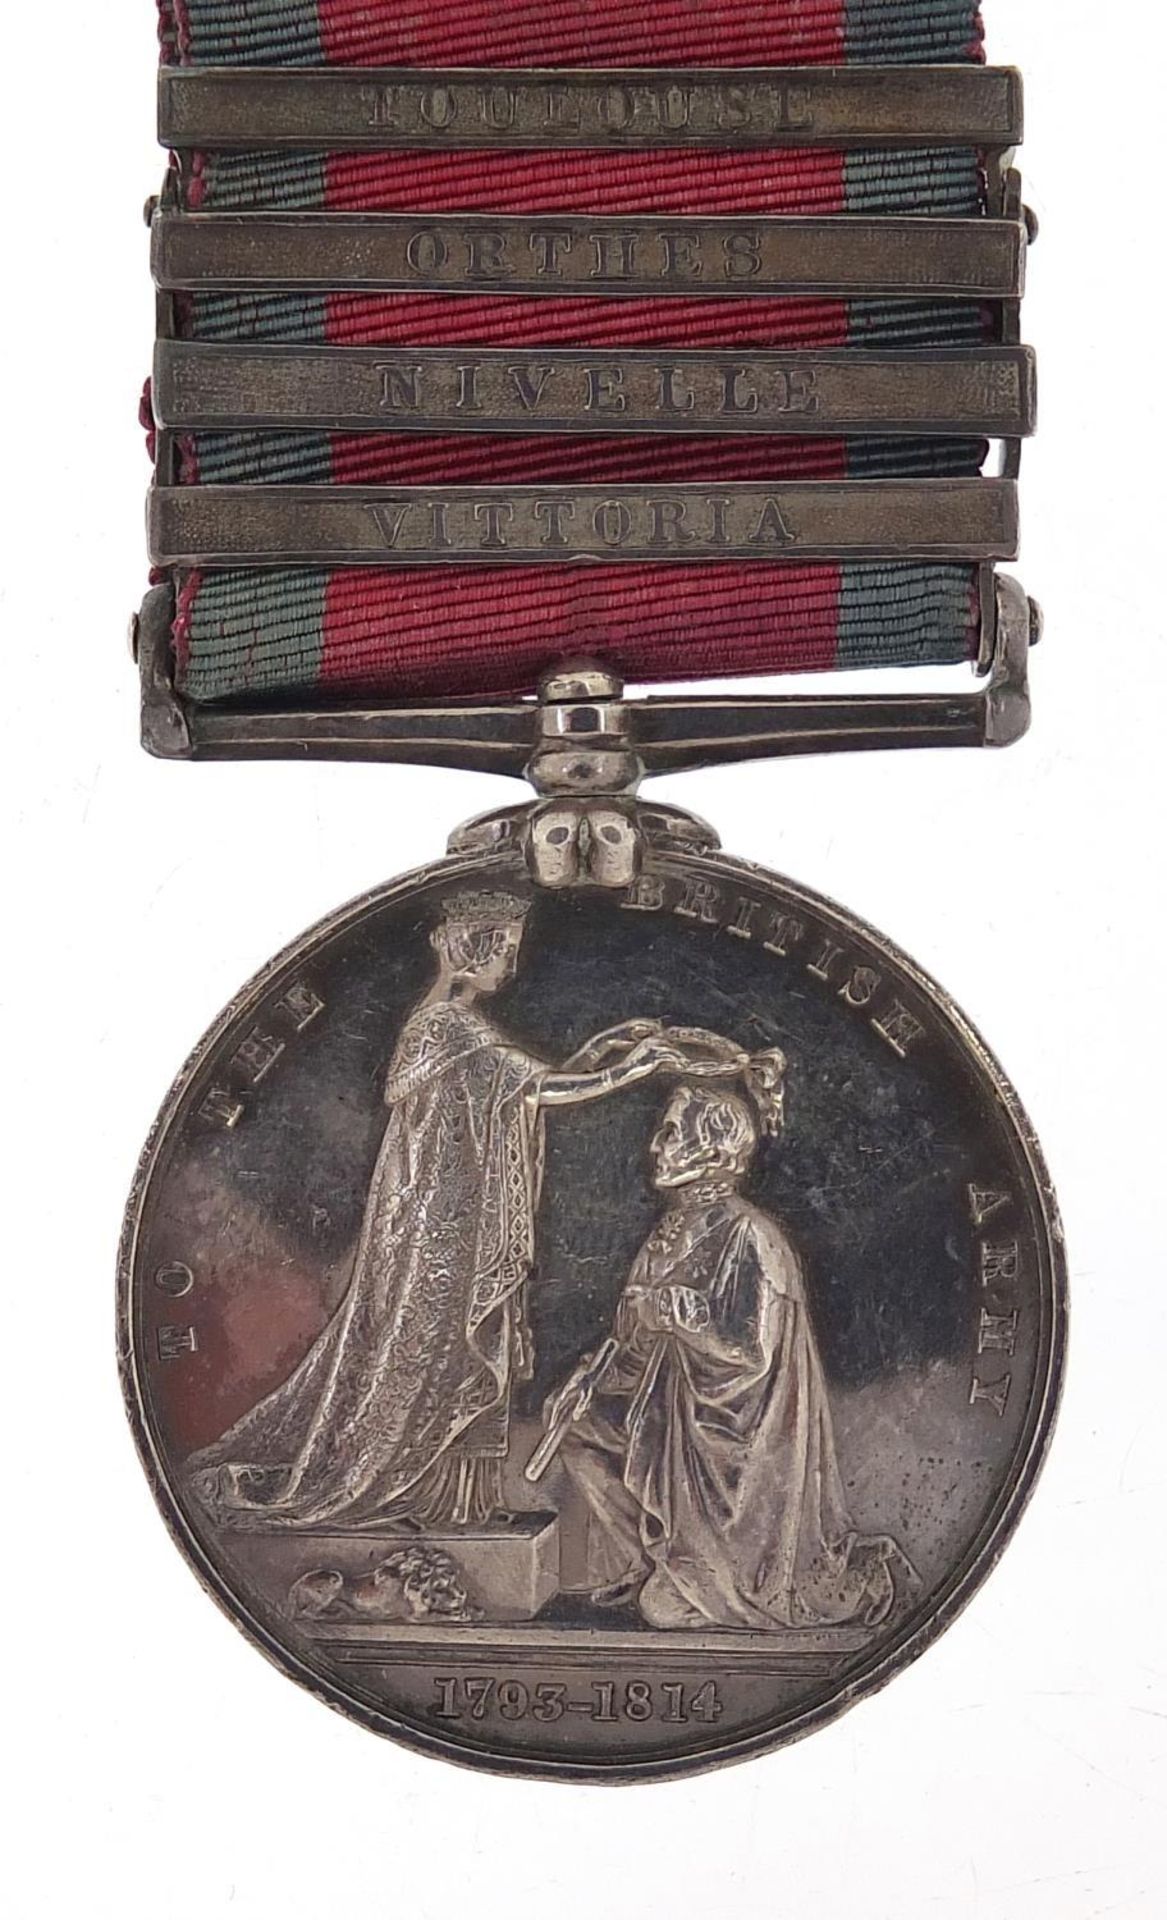 Victorian British military four bar General Service medal awarded to S AUSTIN 48TH FOOT with